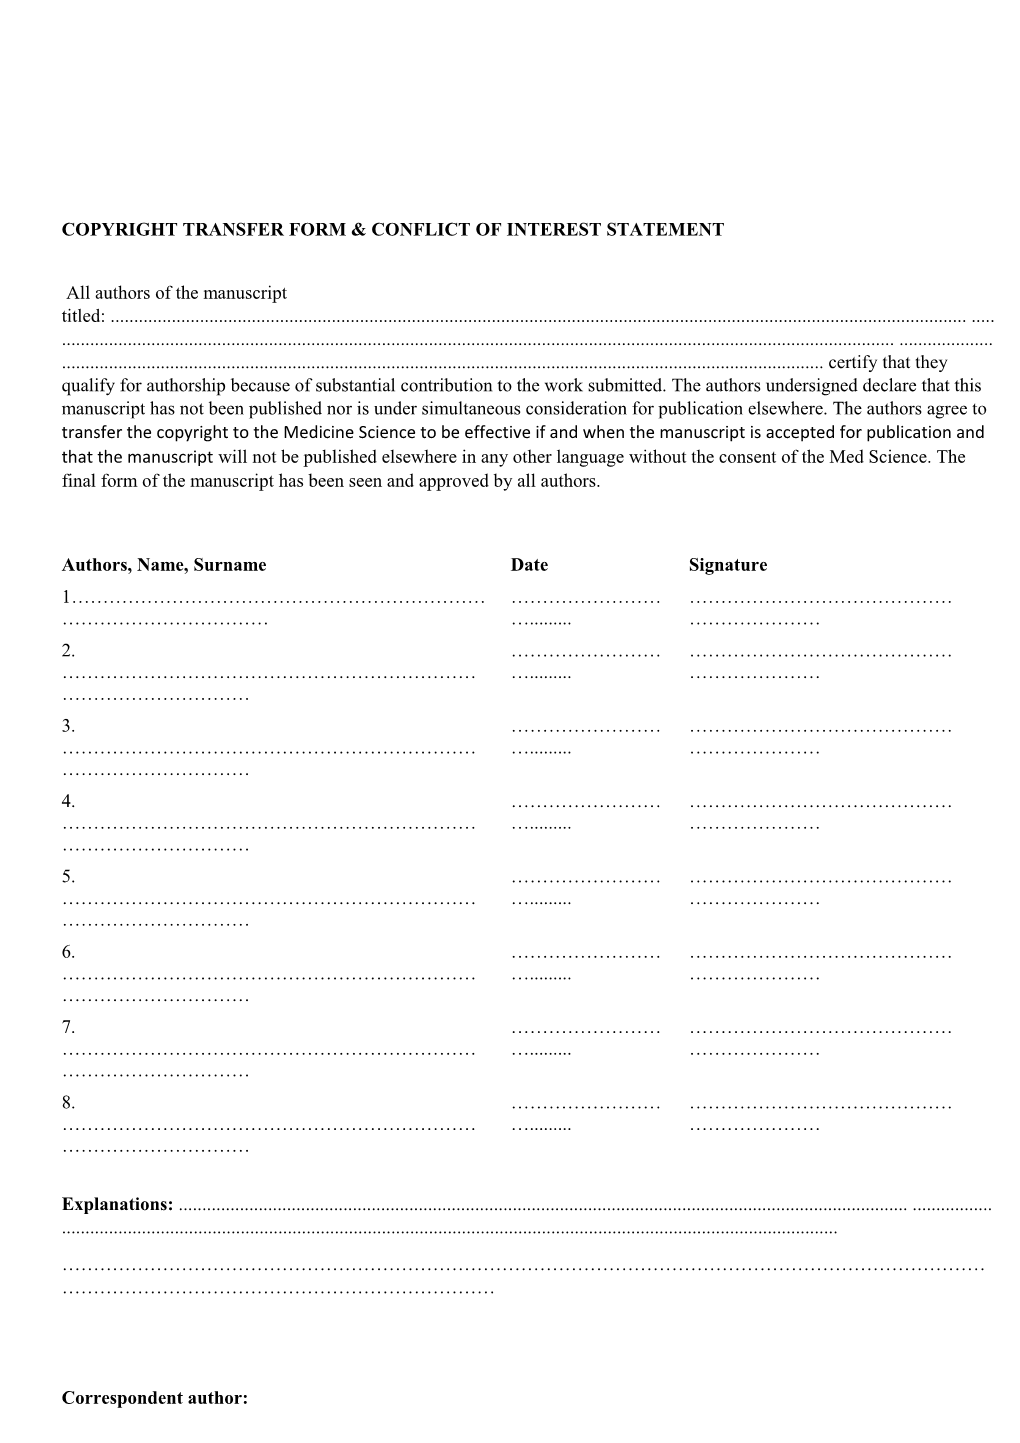 Copyright Transfer Form & Conflict of Interest Statement